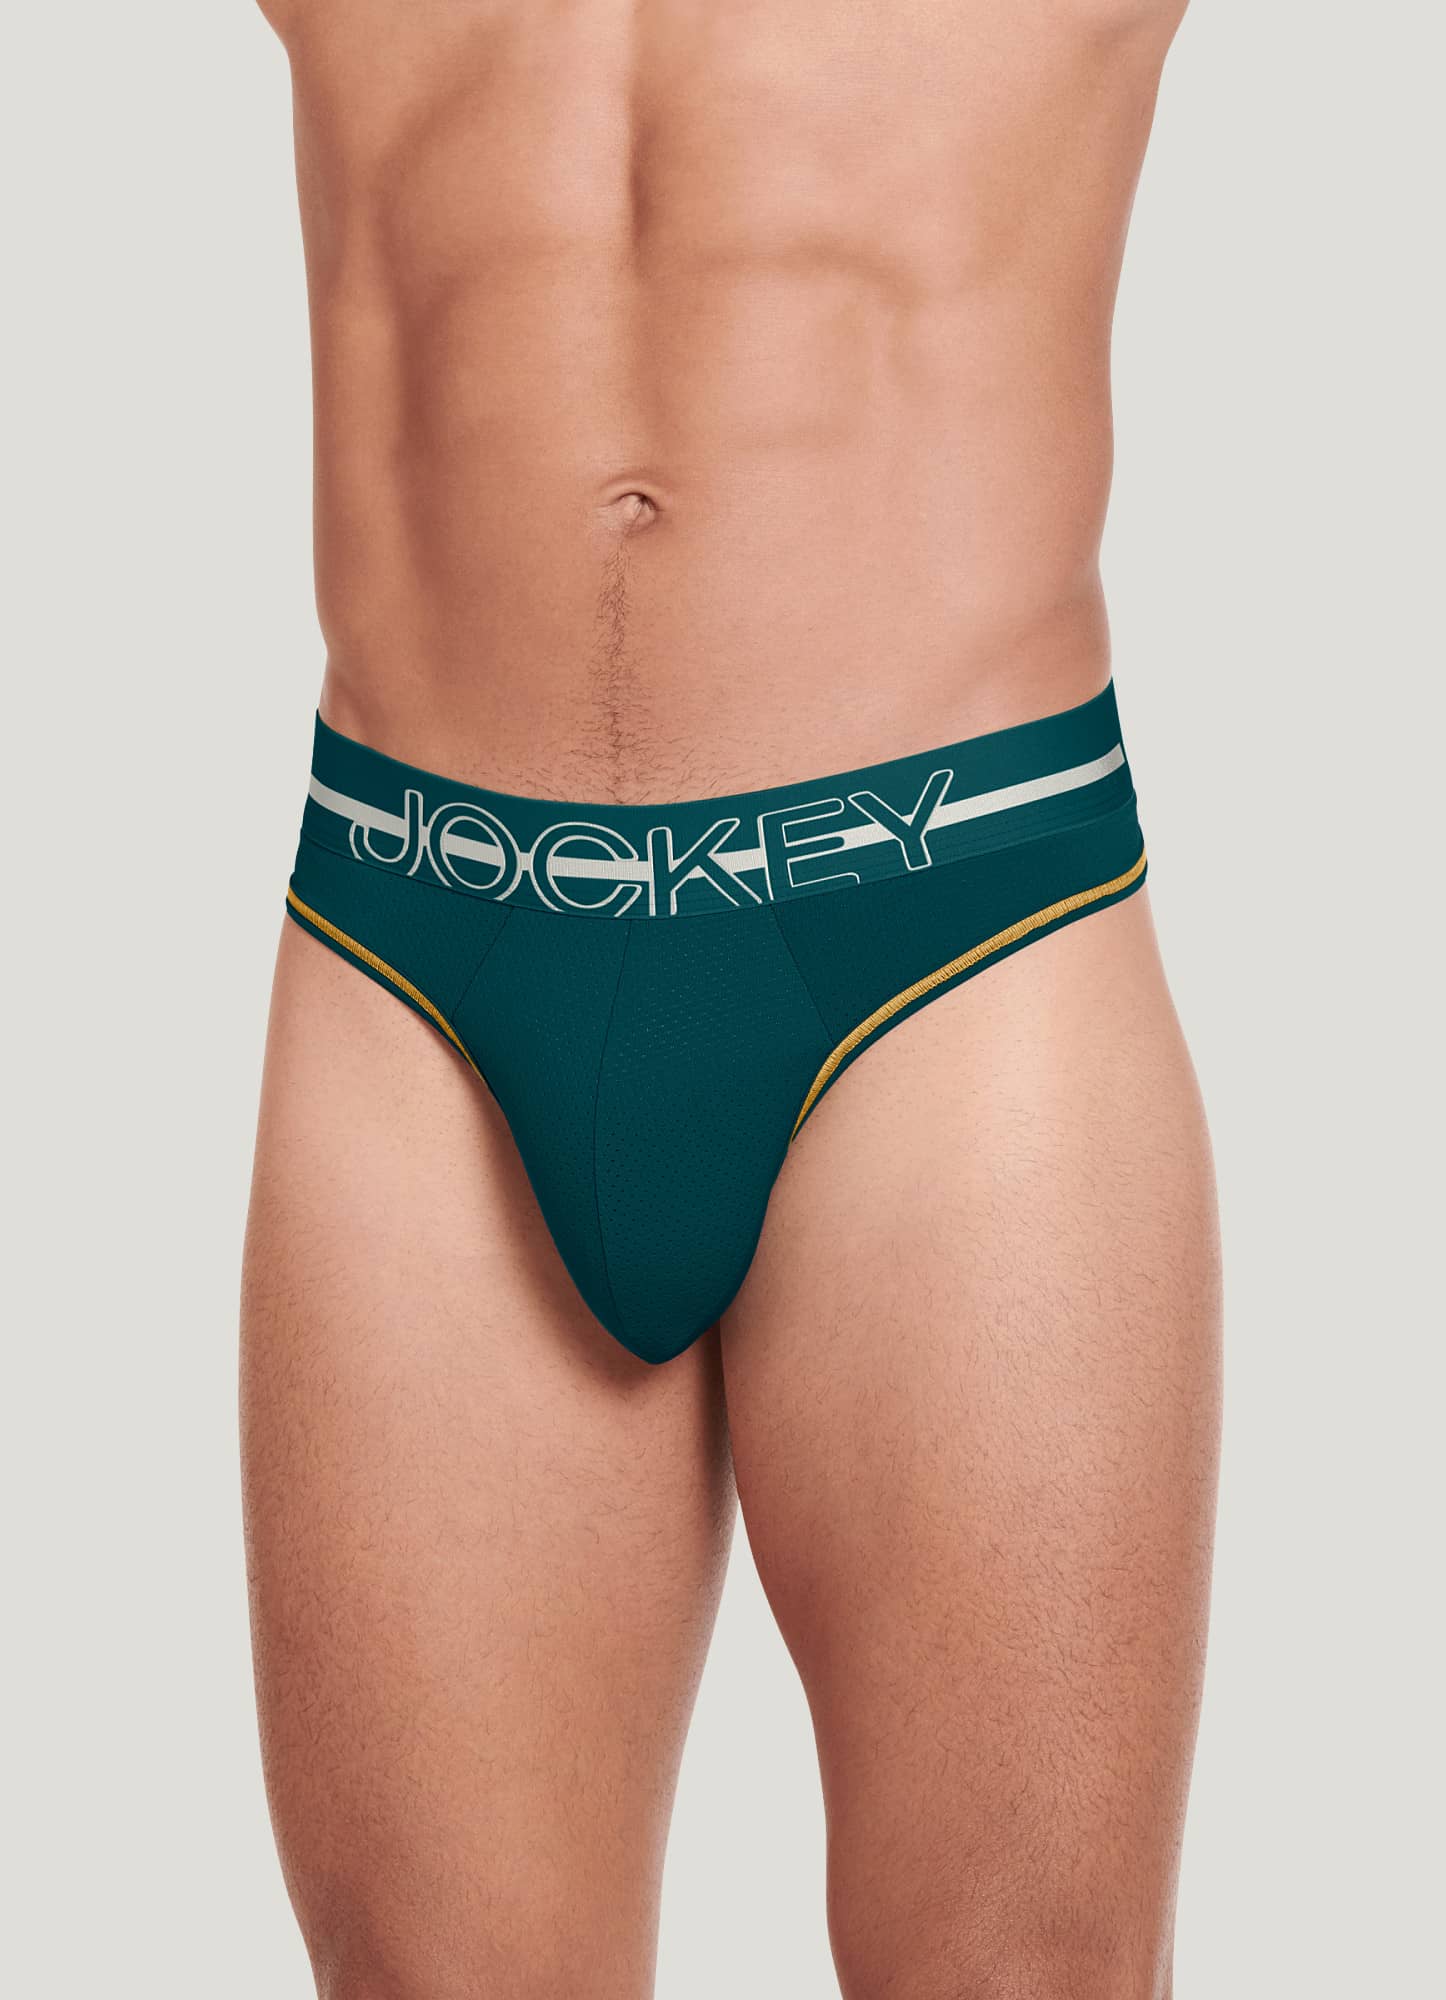 Thong/String Big & Tall Underwear for Men for sale